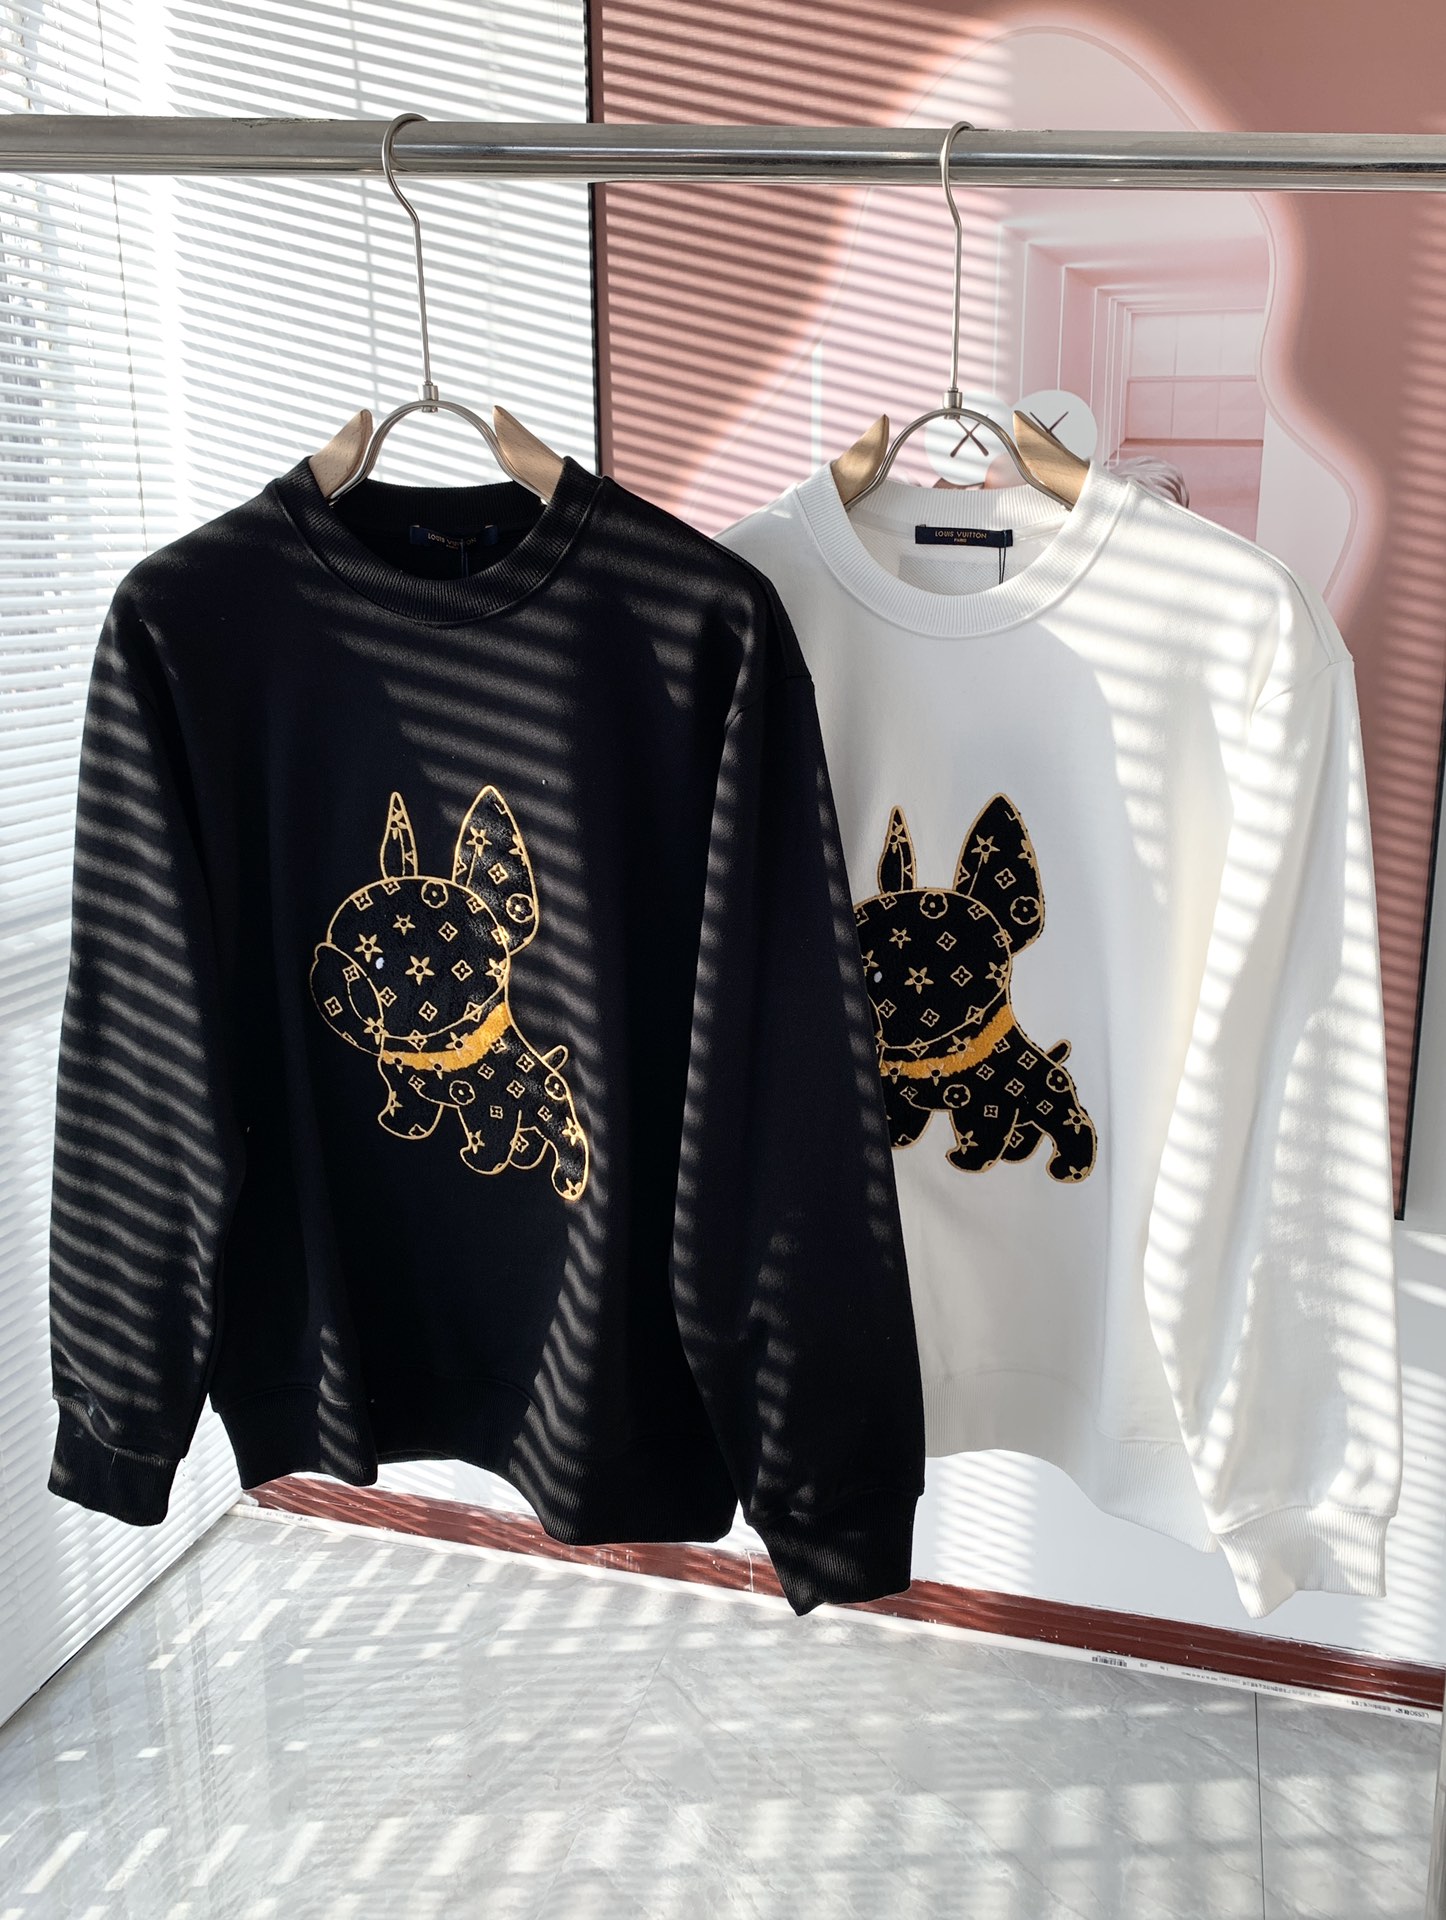 Louis Vuitton Clothing Sweatshirts Black White Embroidery Unisex Cotton Fall/Winter Collection Long Sleeve